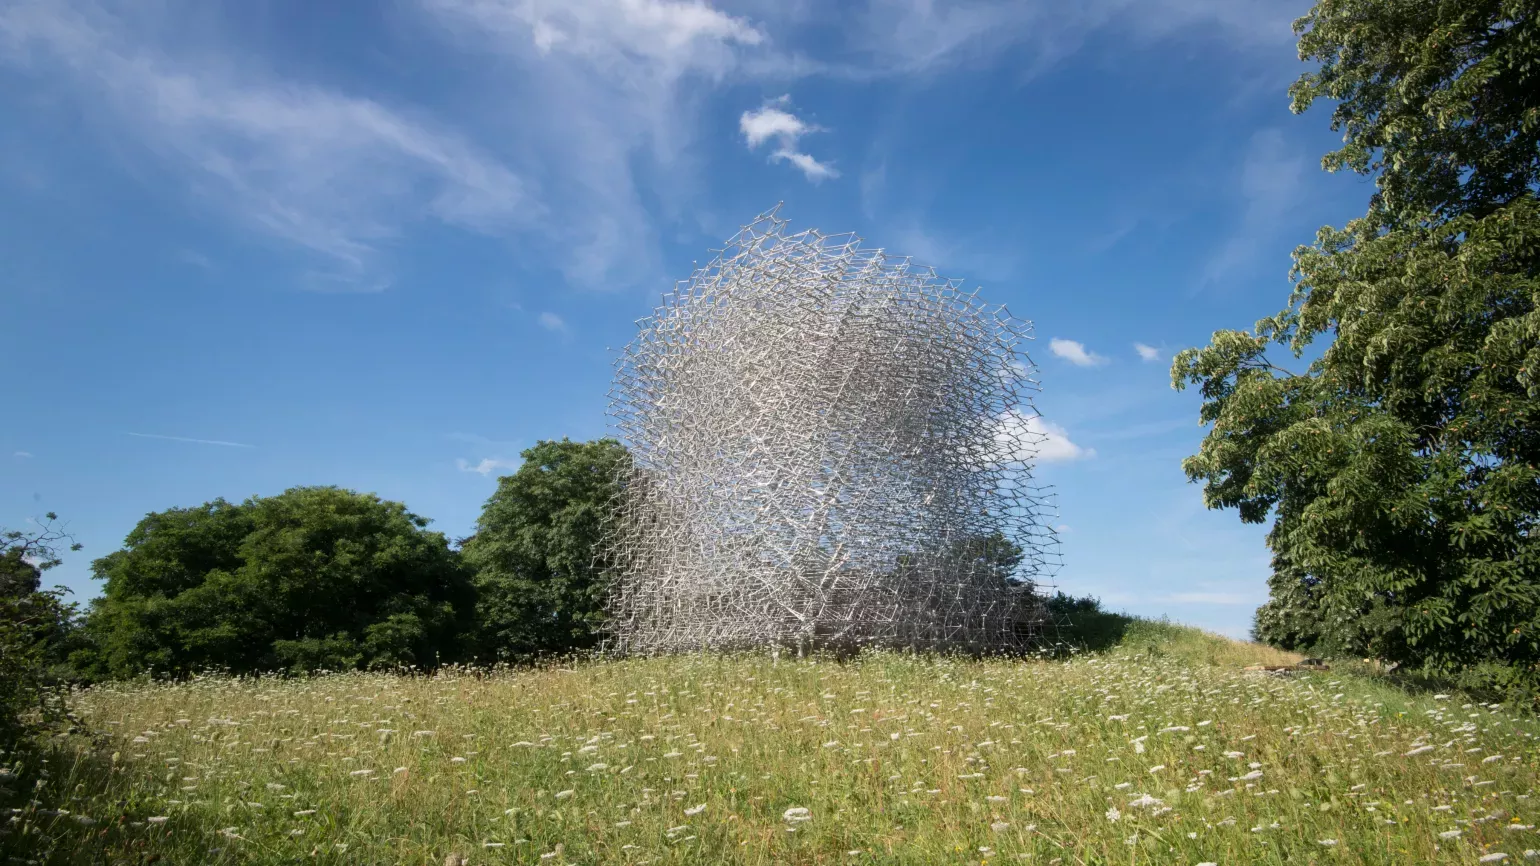 The Hive, a 17 metre installation at Kew Gardens, viewed from a distance 